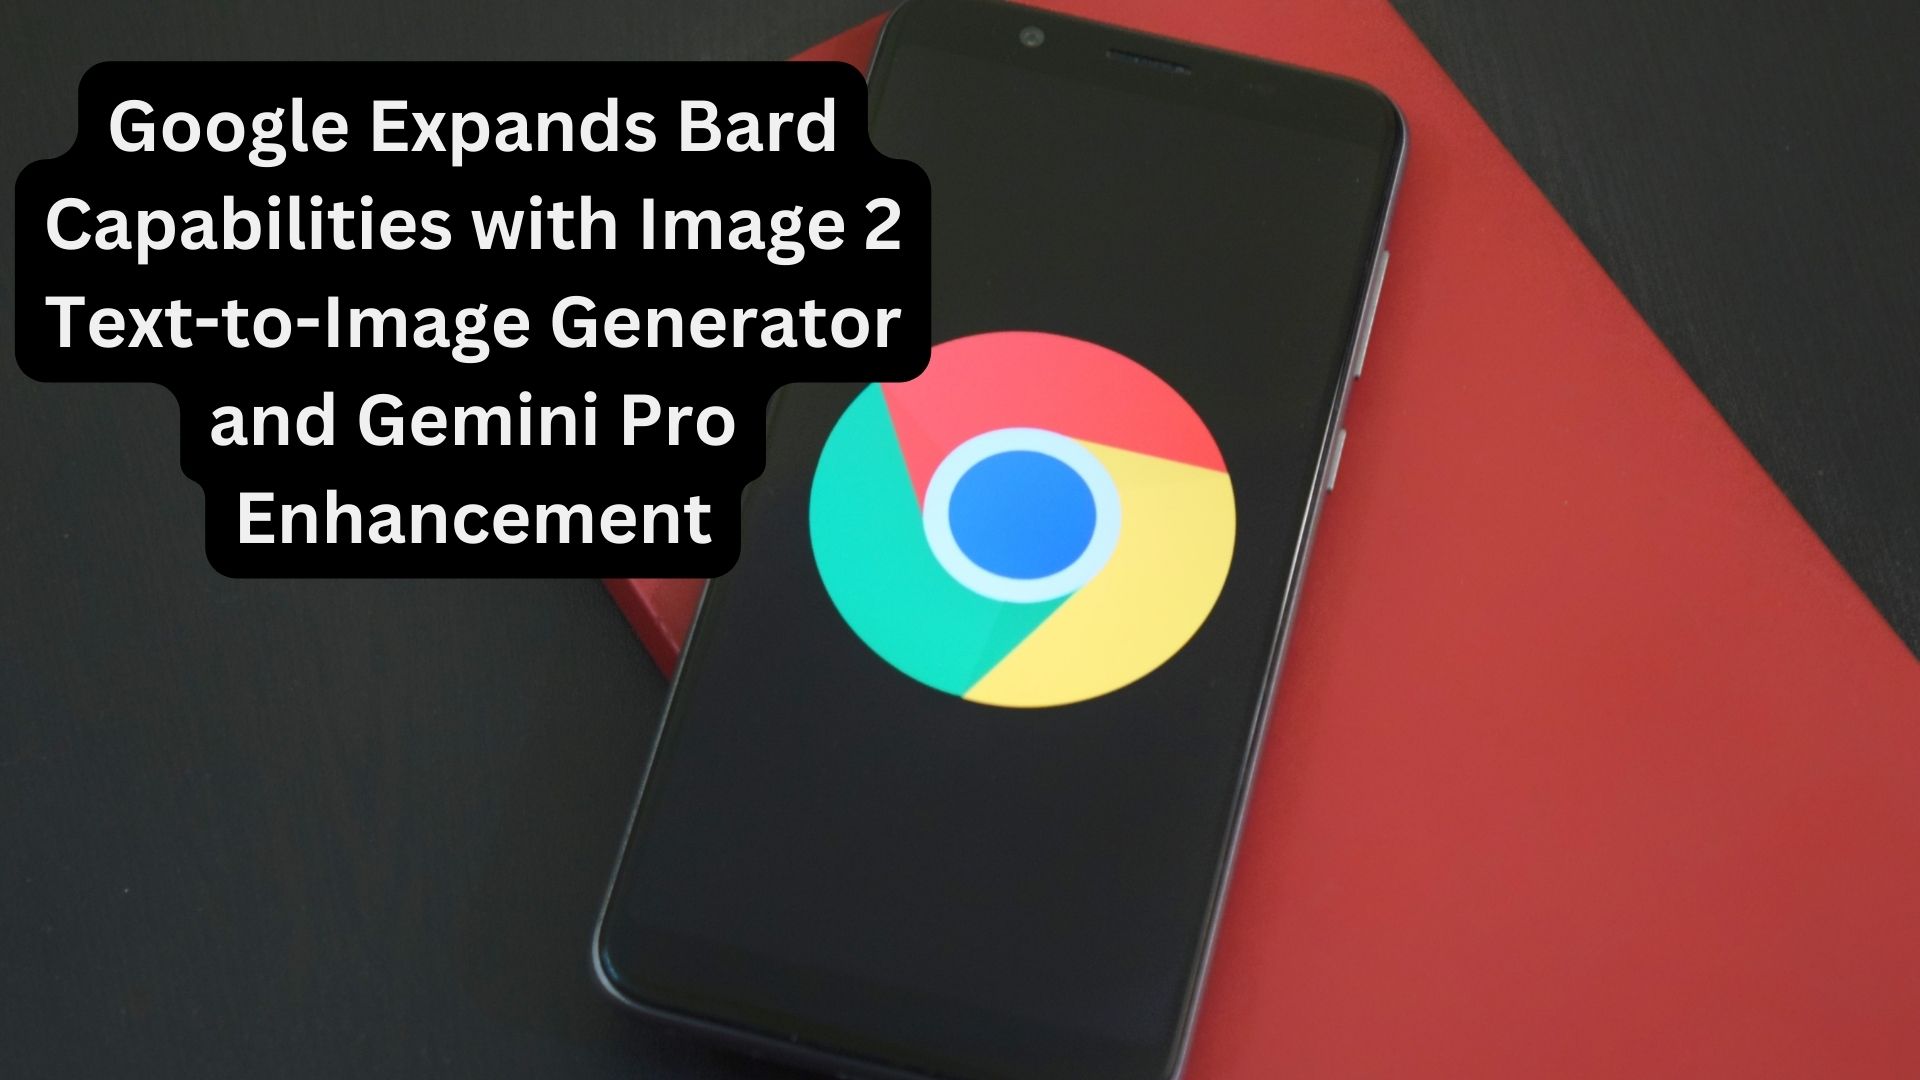 Google Expands Bard Capabilities with Imagen 2 Text-to-Image Generator and Gemini Pro Enhancement